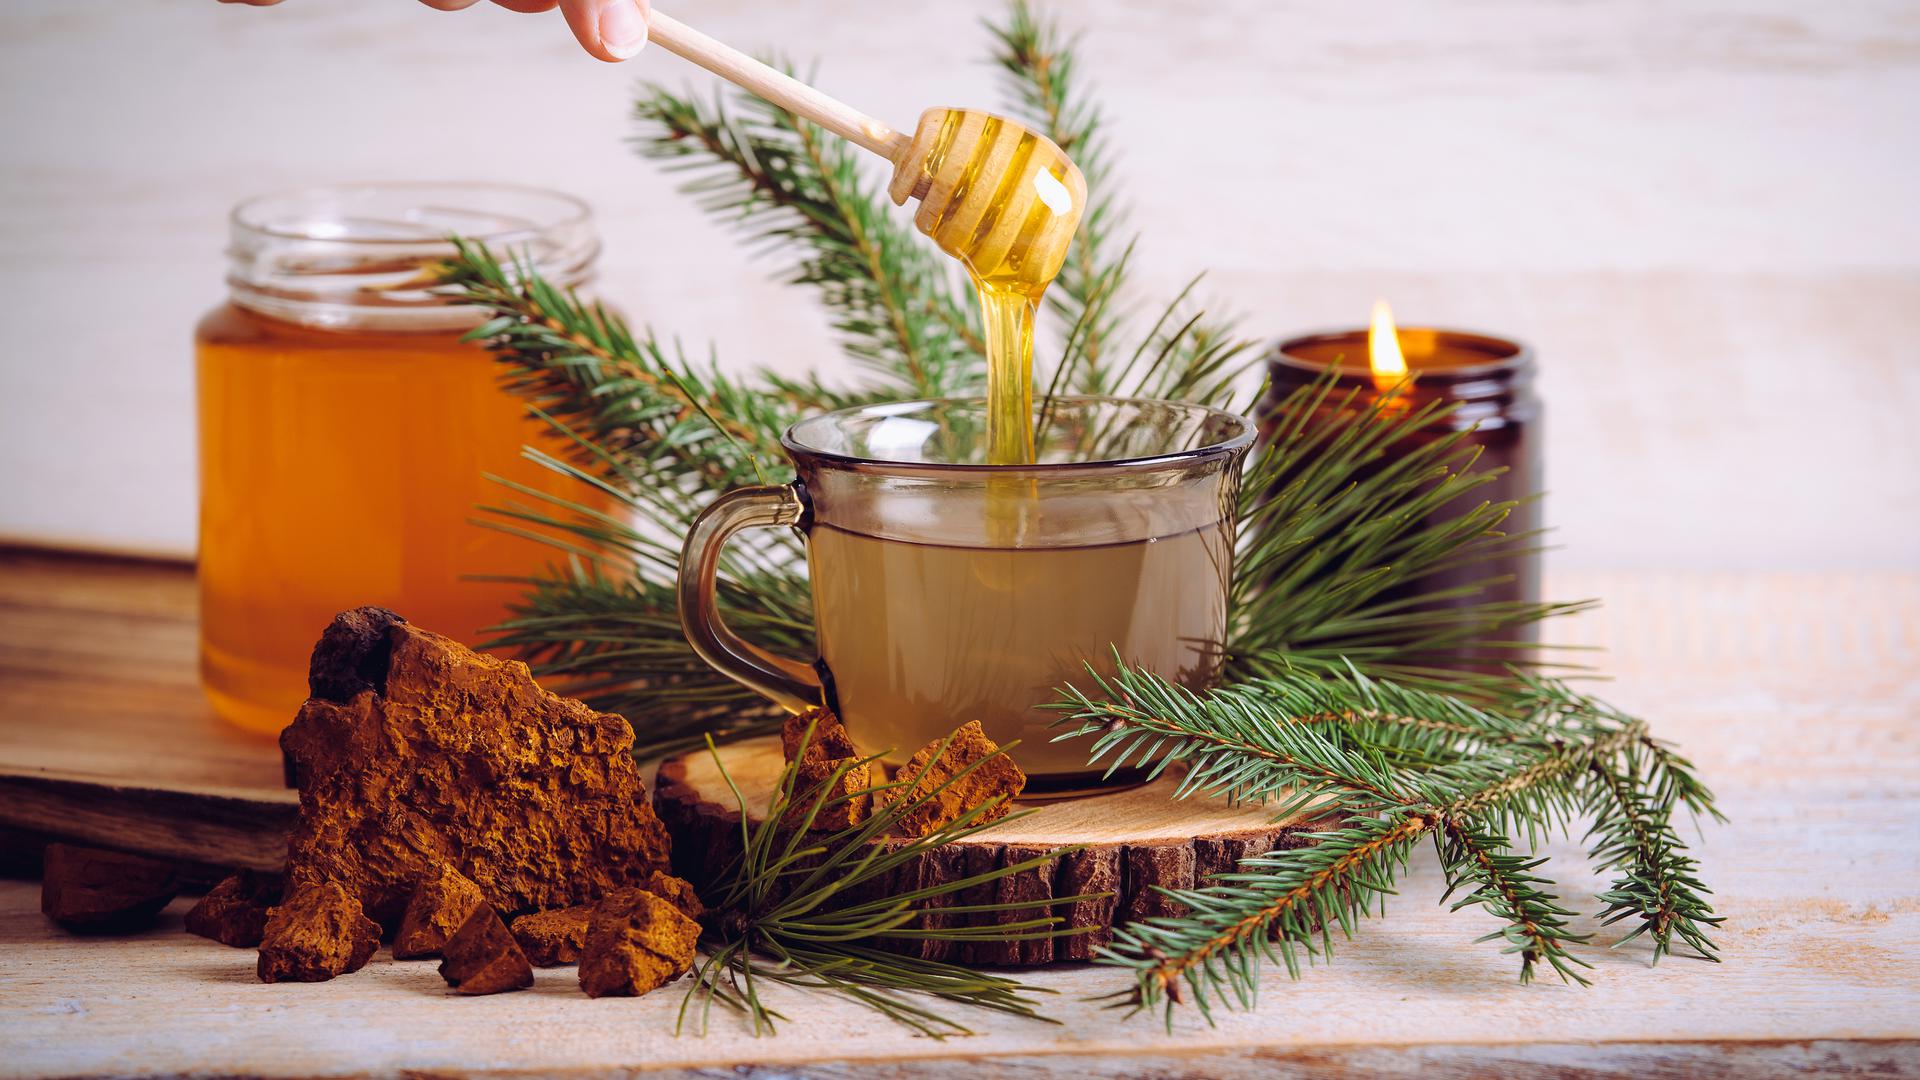 Fir, spruce and pine are edible trees and their needles make a warming tea